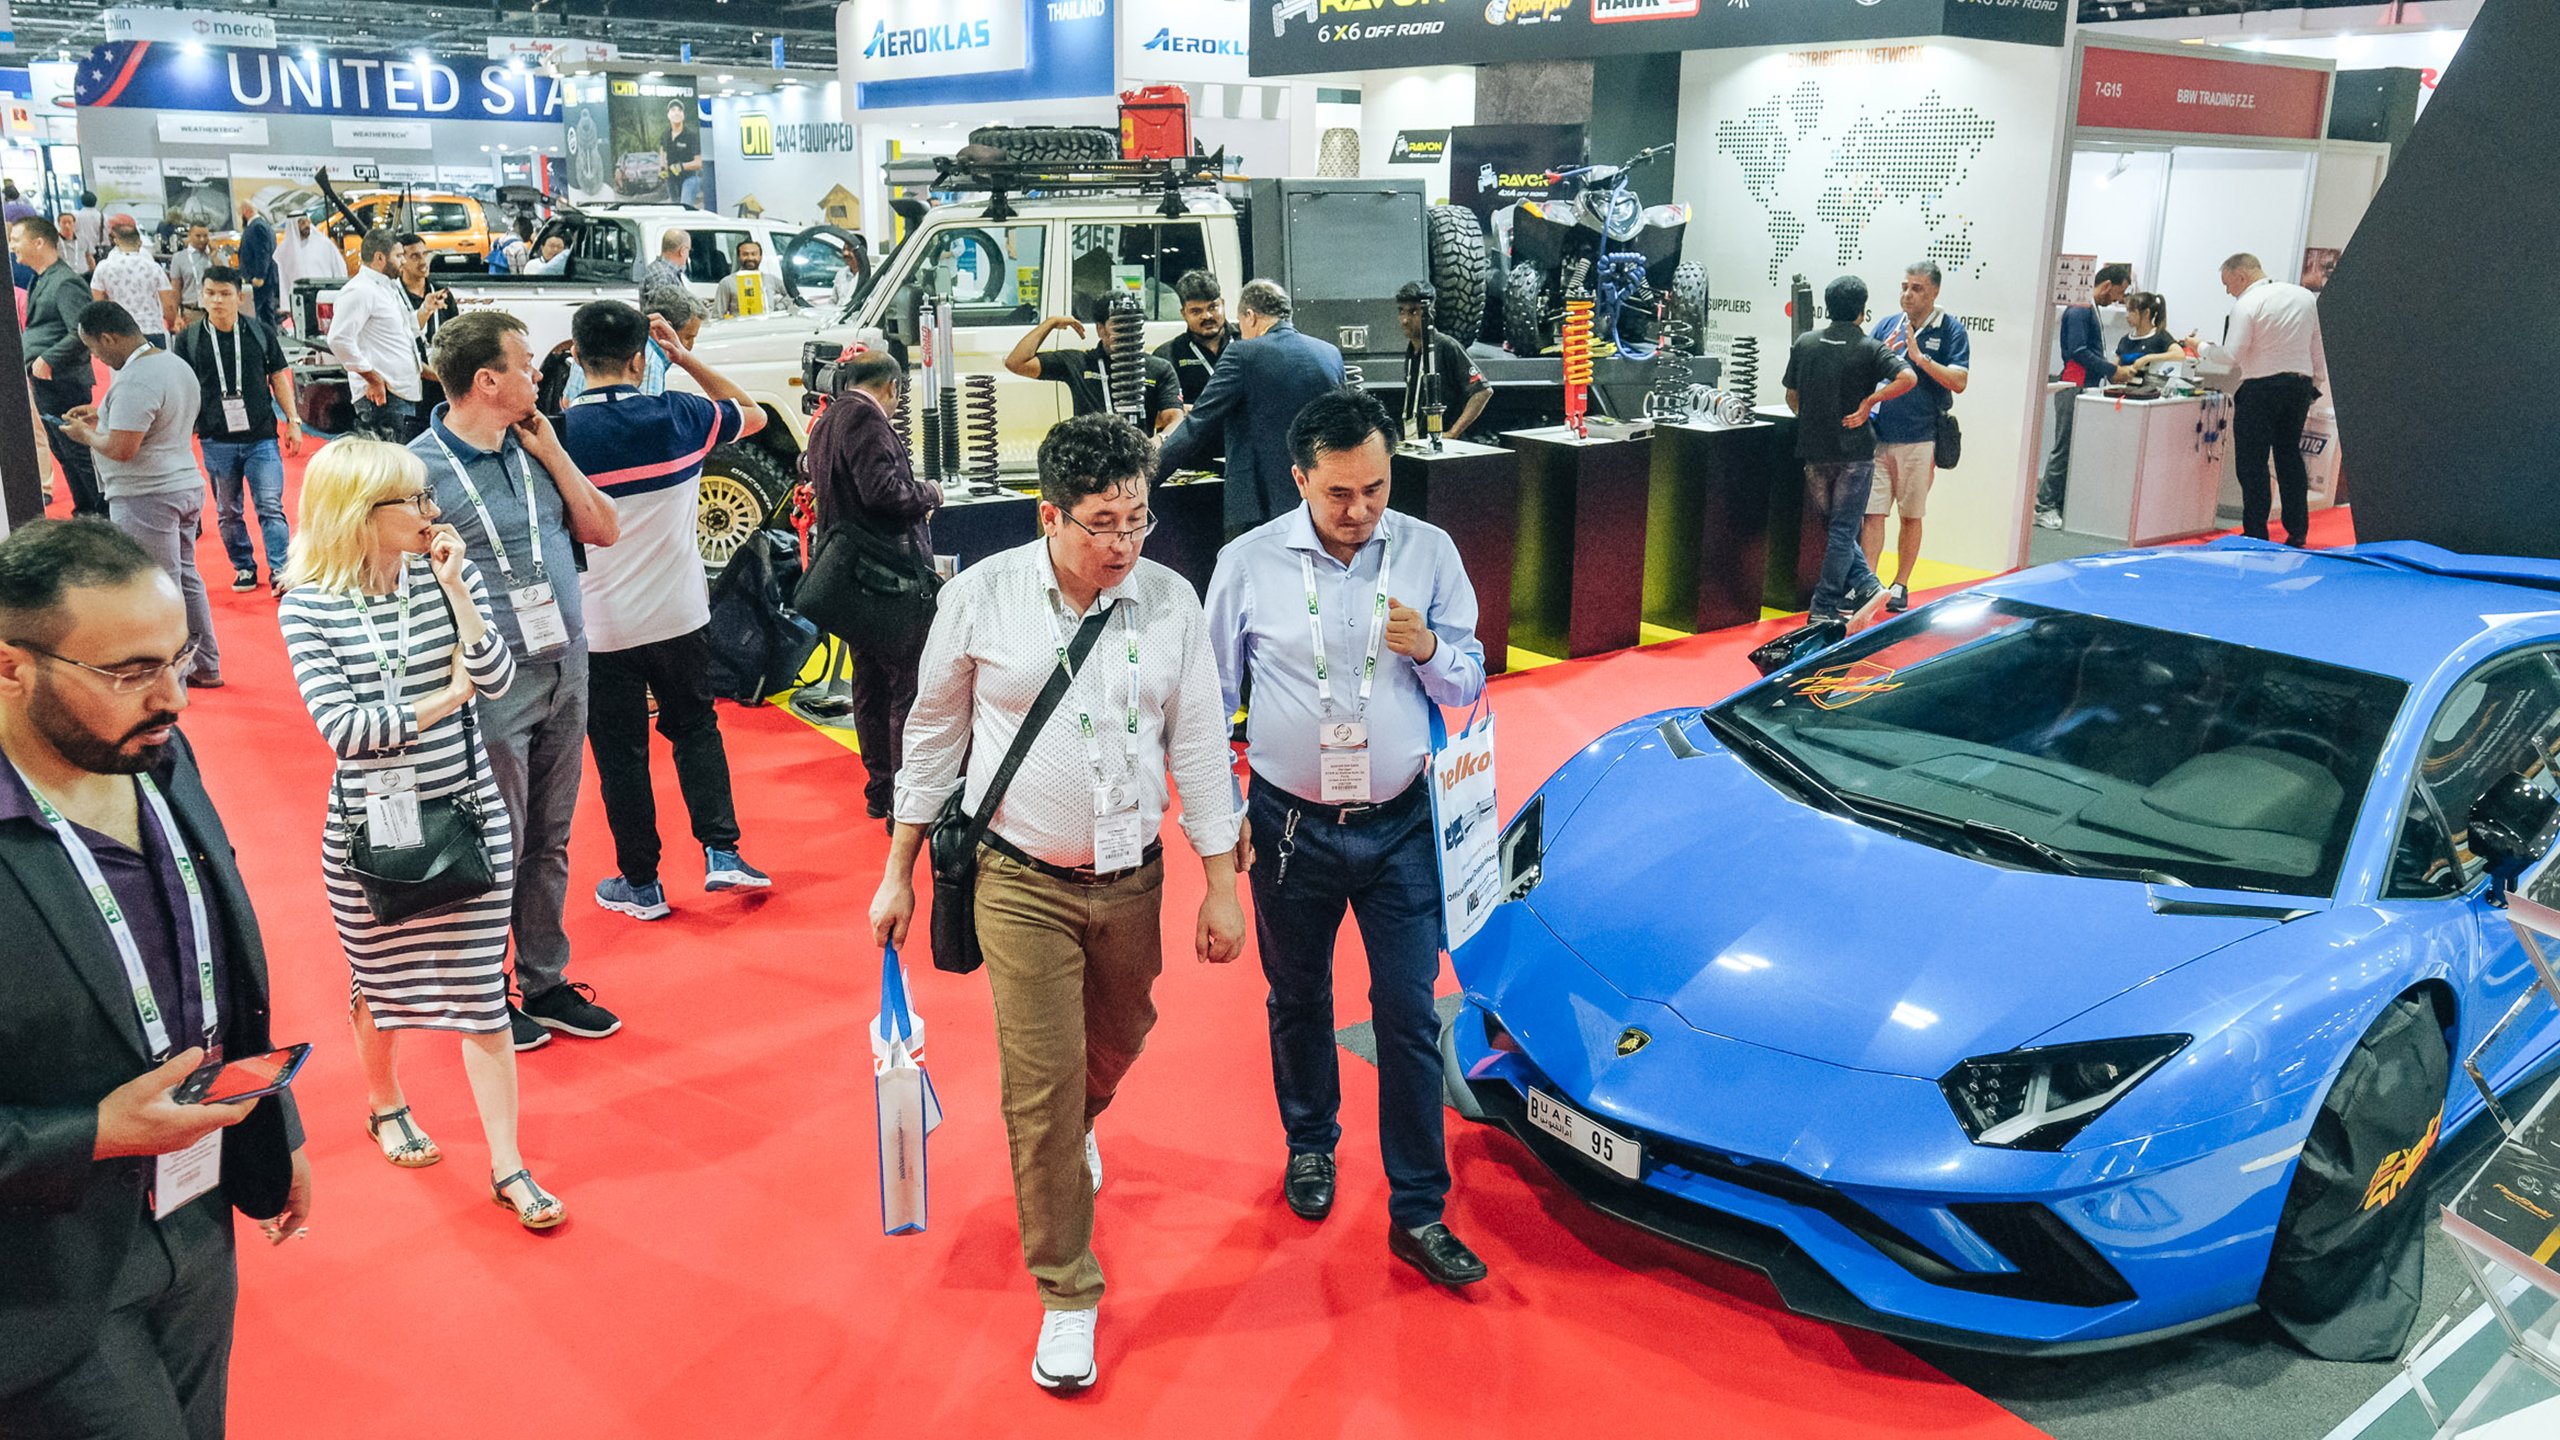 Dubai Postpones Automechanika from June 7 to October 19 2020. The event will have several exciting elements for thousands of trade buyers and industry professionals